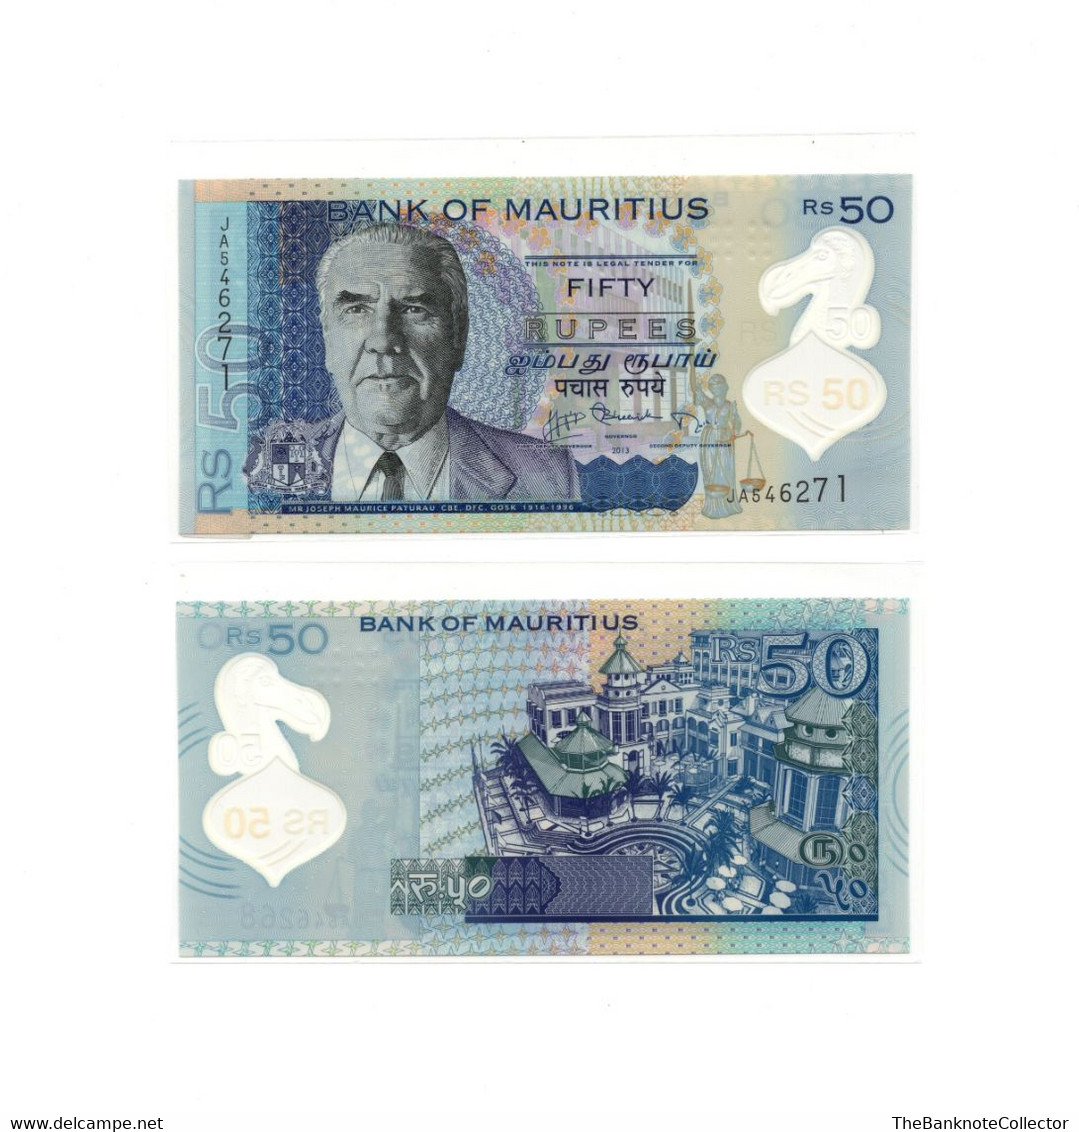 Mauritius 50 Rupees 2013 Polymer Issue P-65 UNCIRCULATED - Mauritius